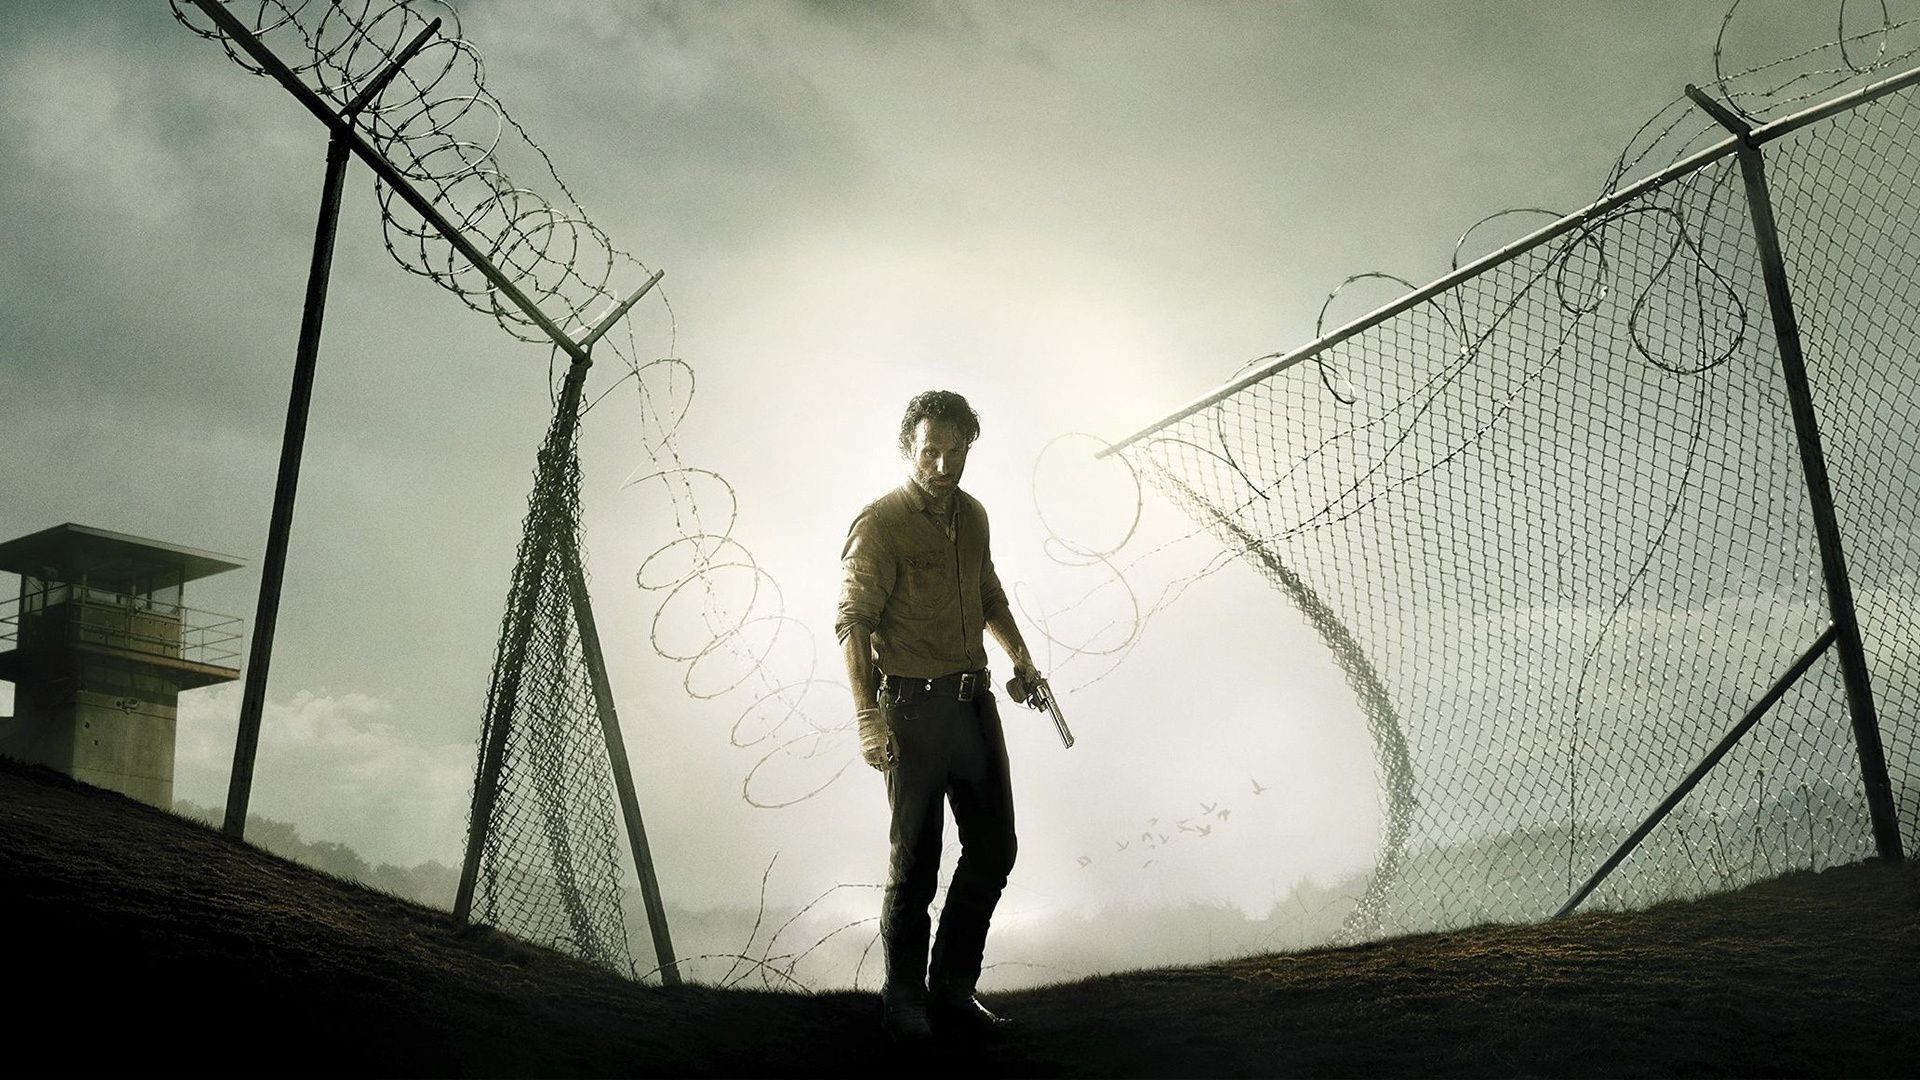 The Walking Dead Wallpapers 1920x1080 - Wallpaper Cave